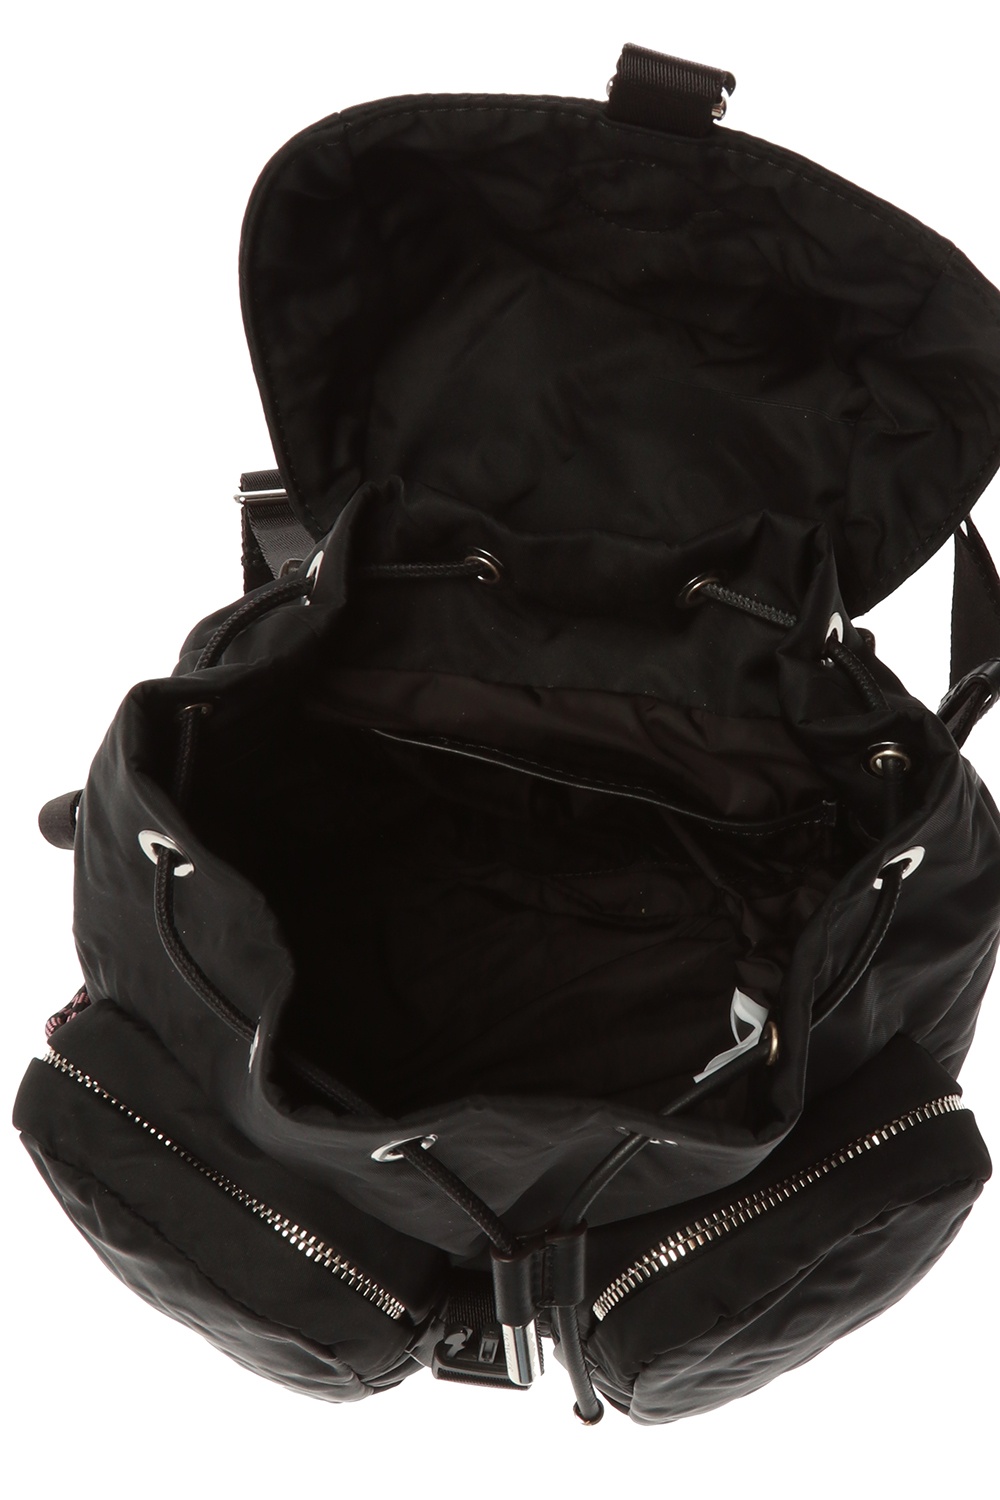 Moncler 'Dauphine' logo backpack, Women's Bags, Check out the Jordan  Retro 12 Backpack below thats